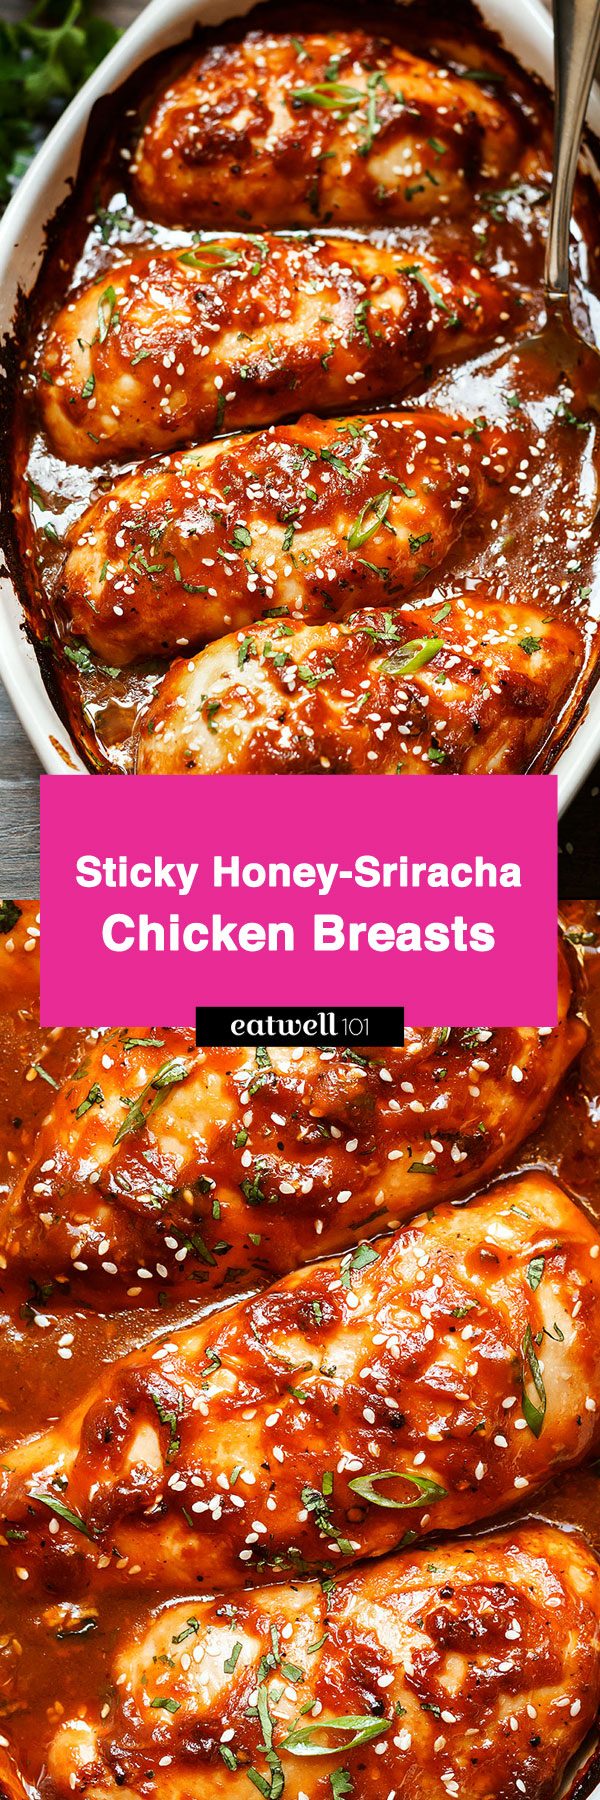 Baked Chicken Breasts with Sticky Honey Sriracha Sauce — Eatwell101